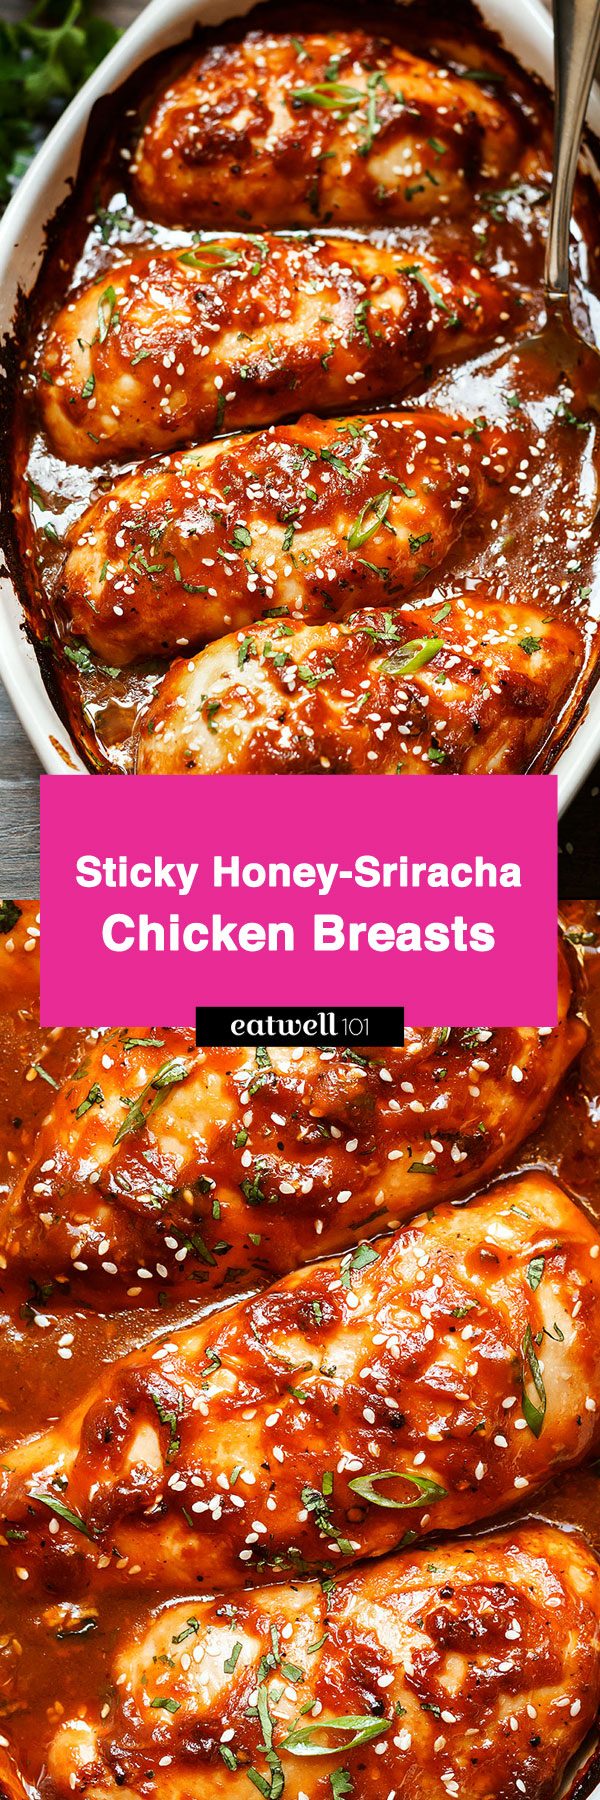 Baked Chicken Breasts with Sticky Honey Sriracha Sauce — Eatwell101